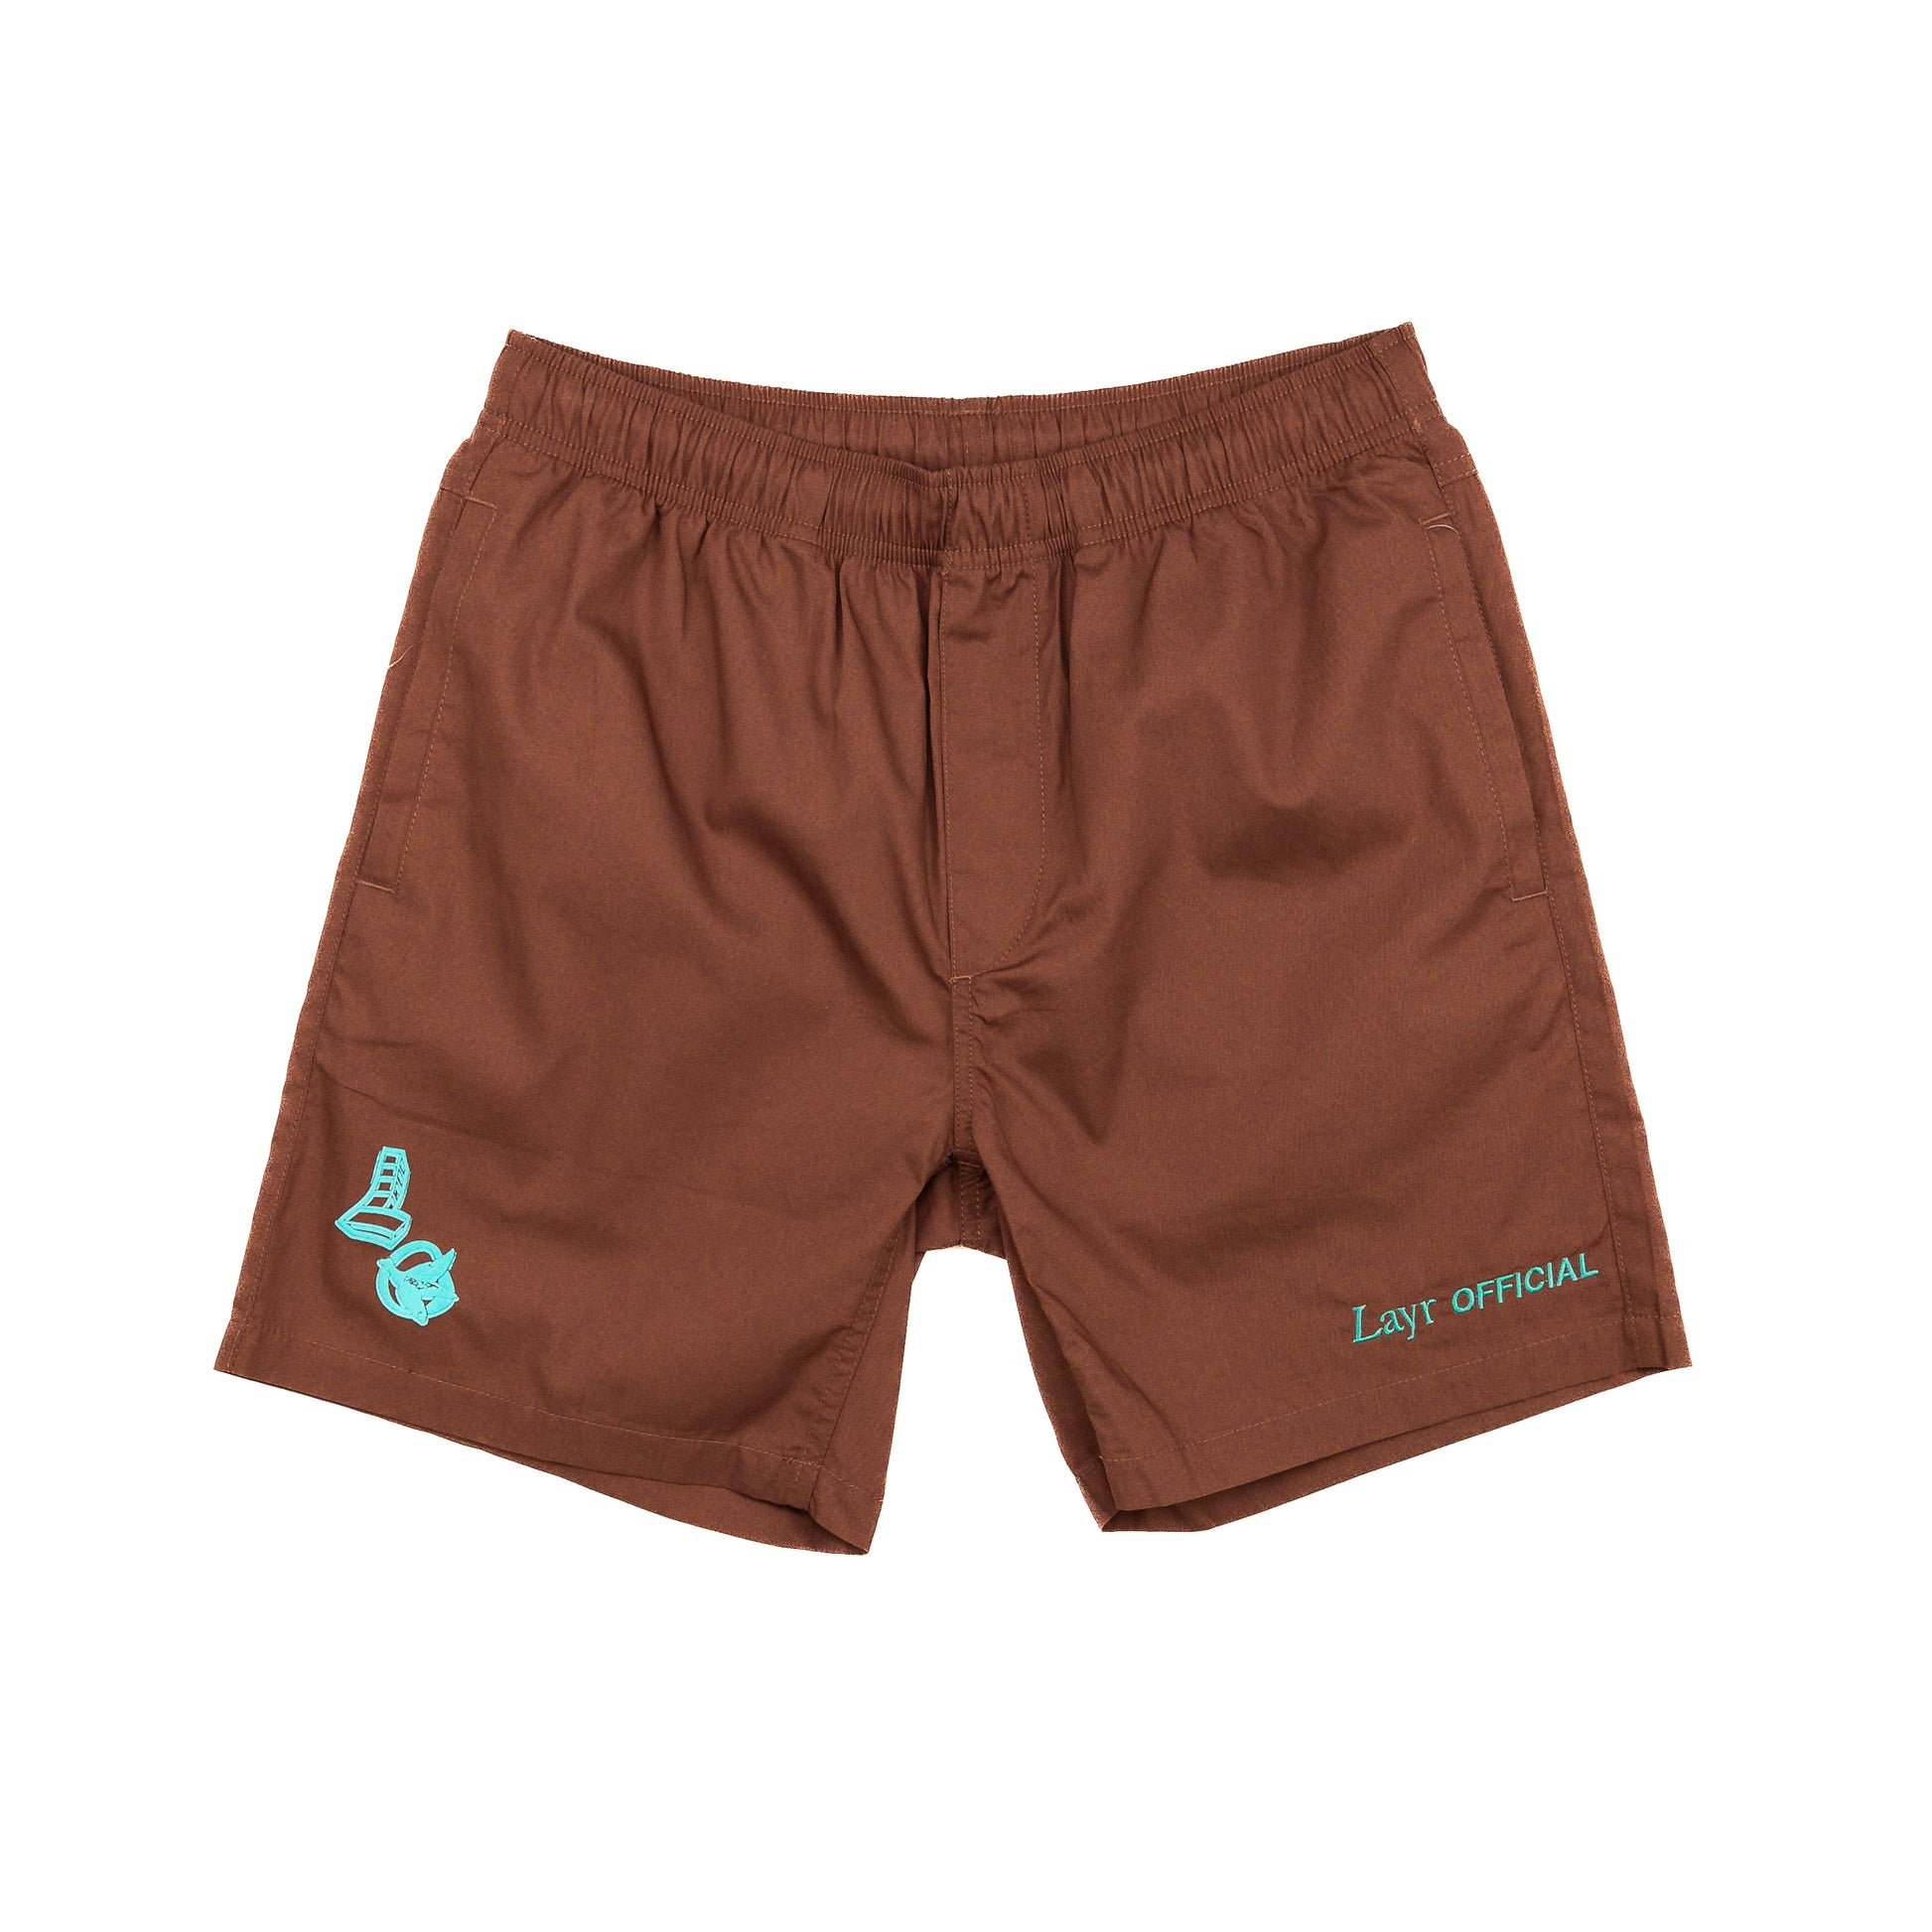 New Lo Surf Short, Clay - Layr Official